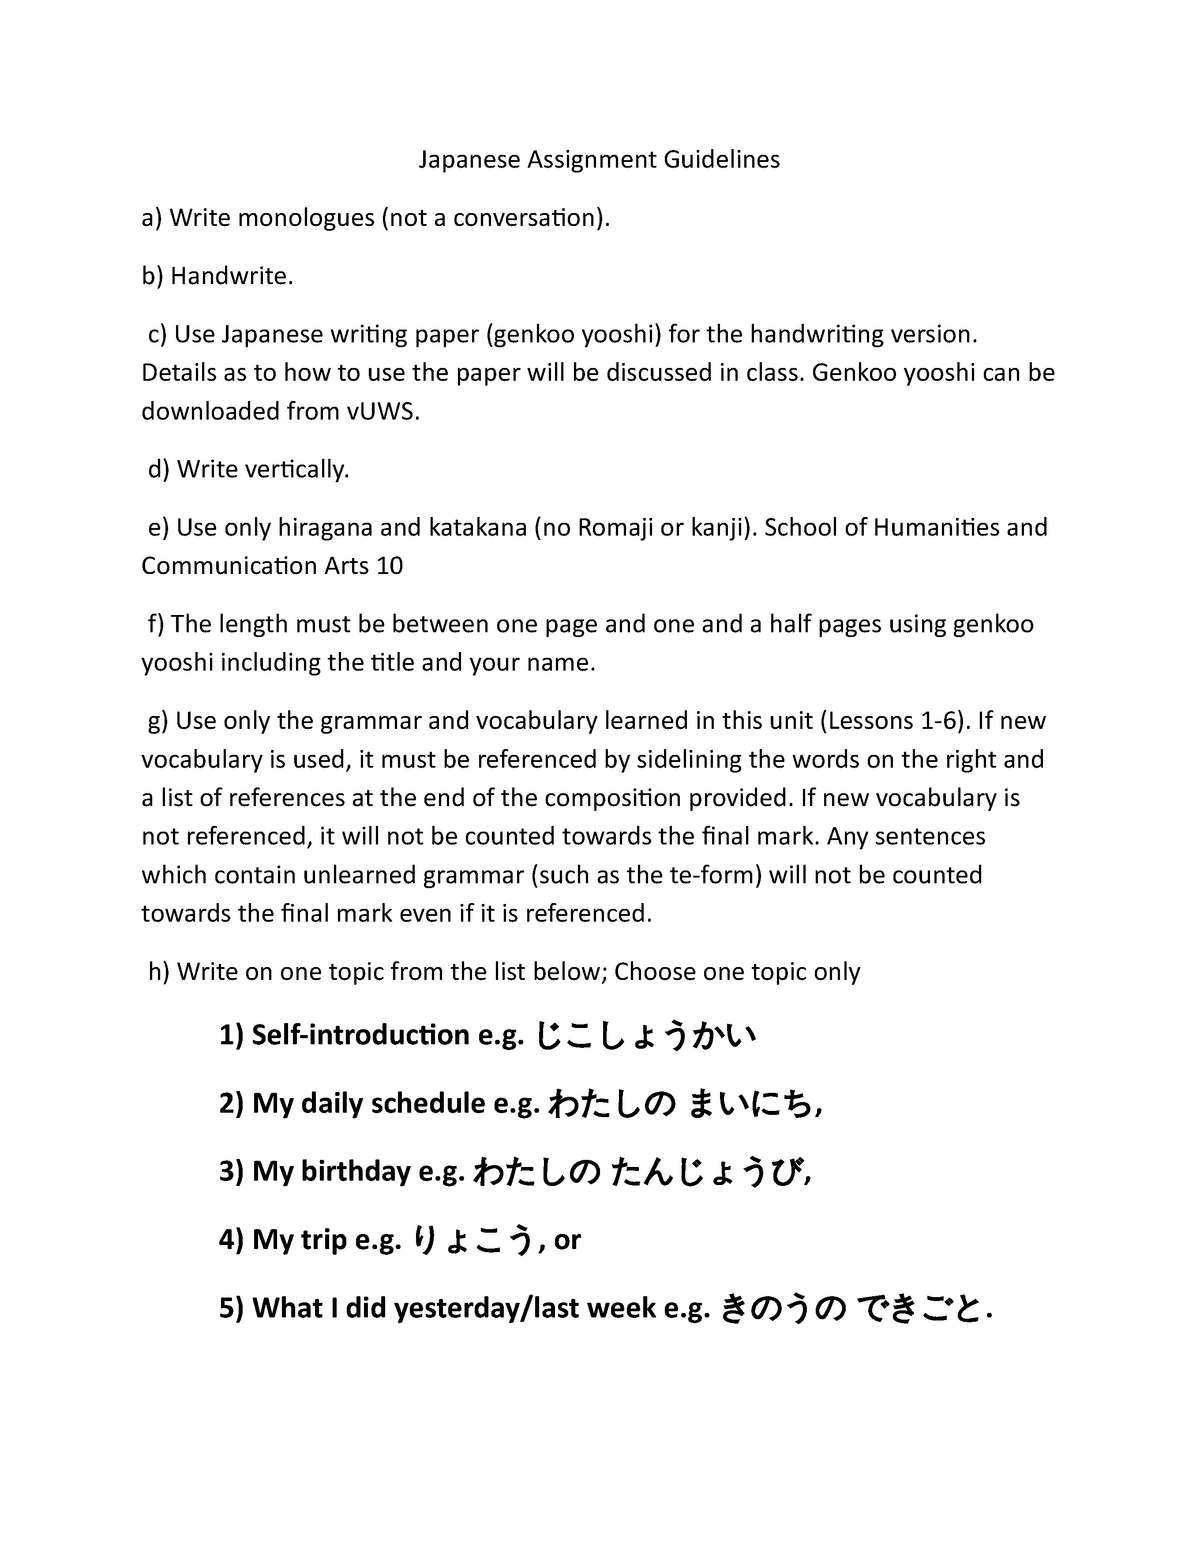 assignment in japanese